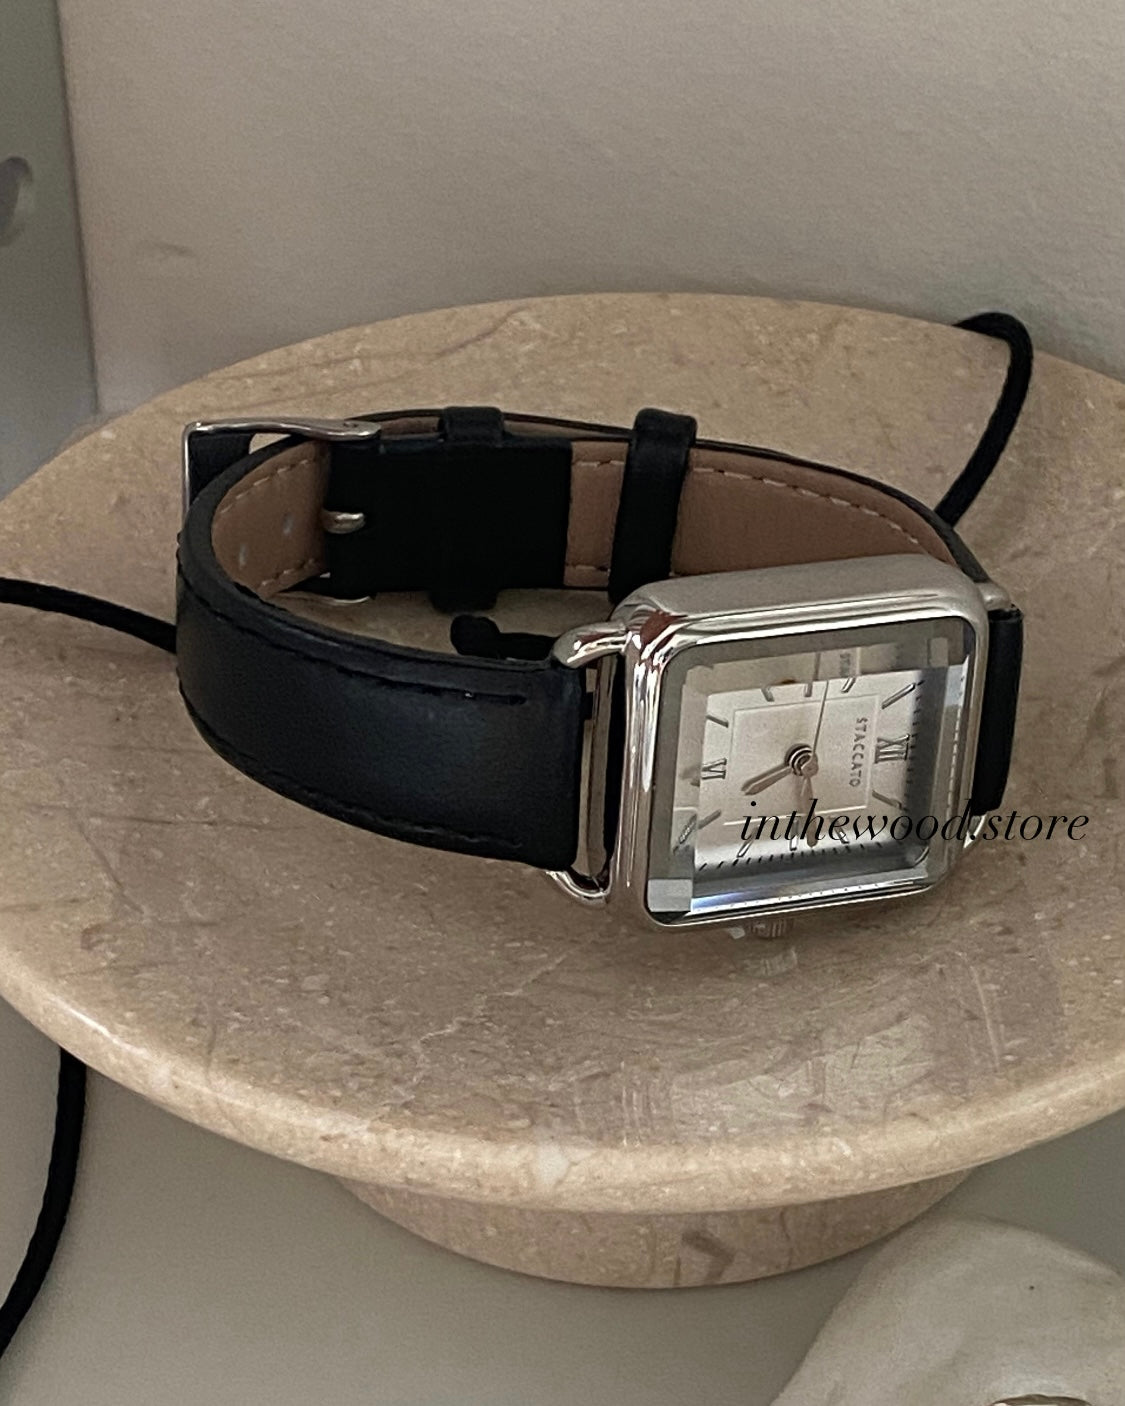 Square Crystal Watch